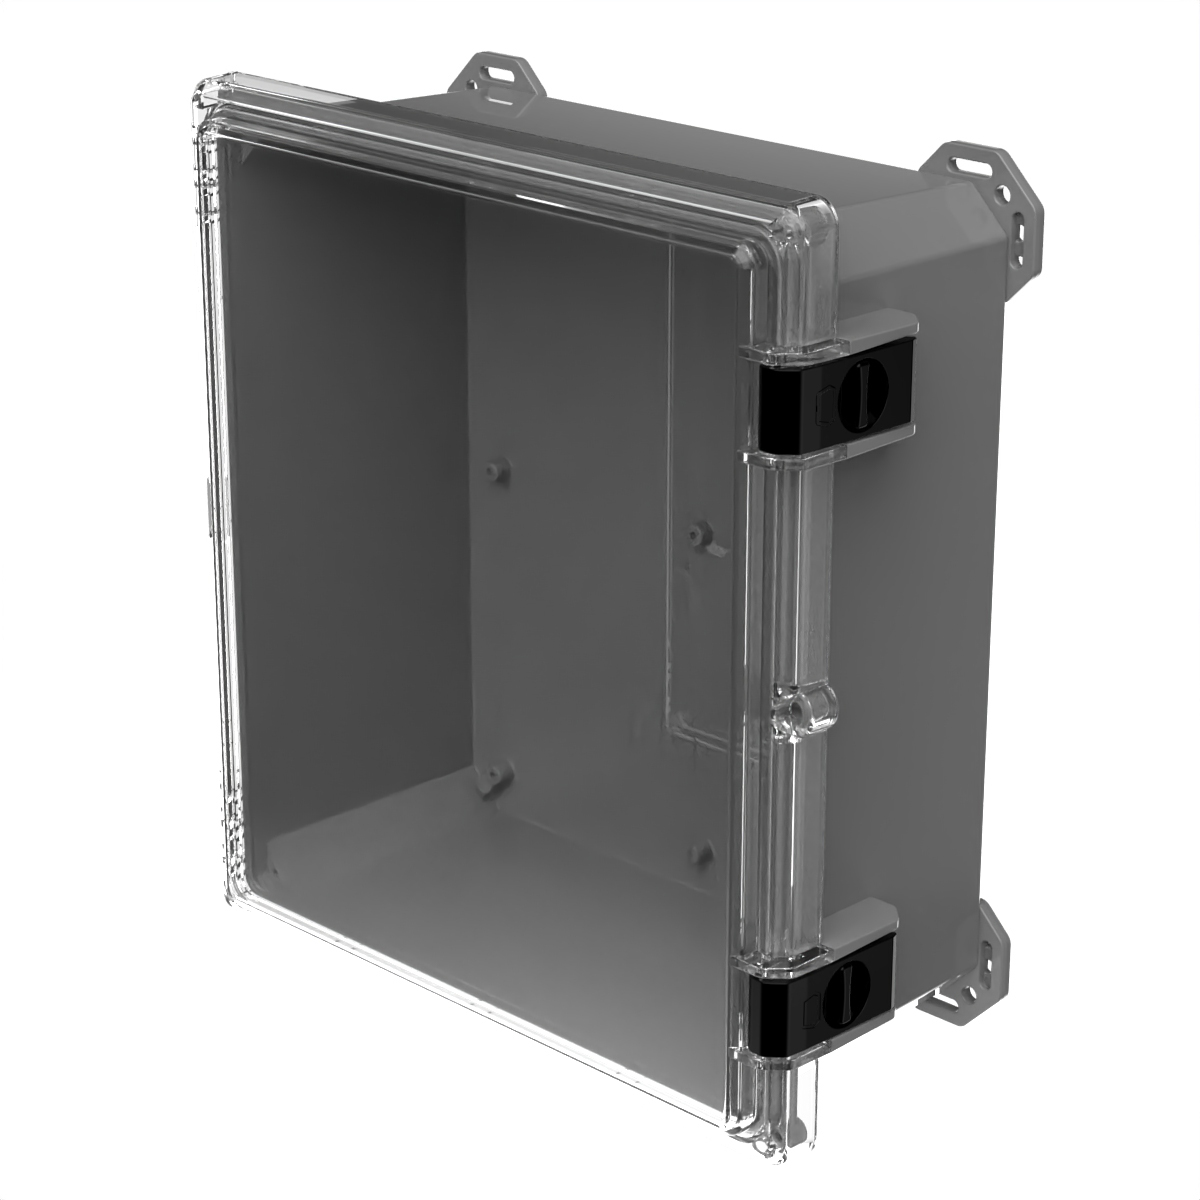 Serpac RB22-1TC1BG Polycarbonate Plastic Enclosure 2.55 Length x 1.97 Width x 1-3/8 Height Top Clear/Bottom Gray 